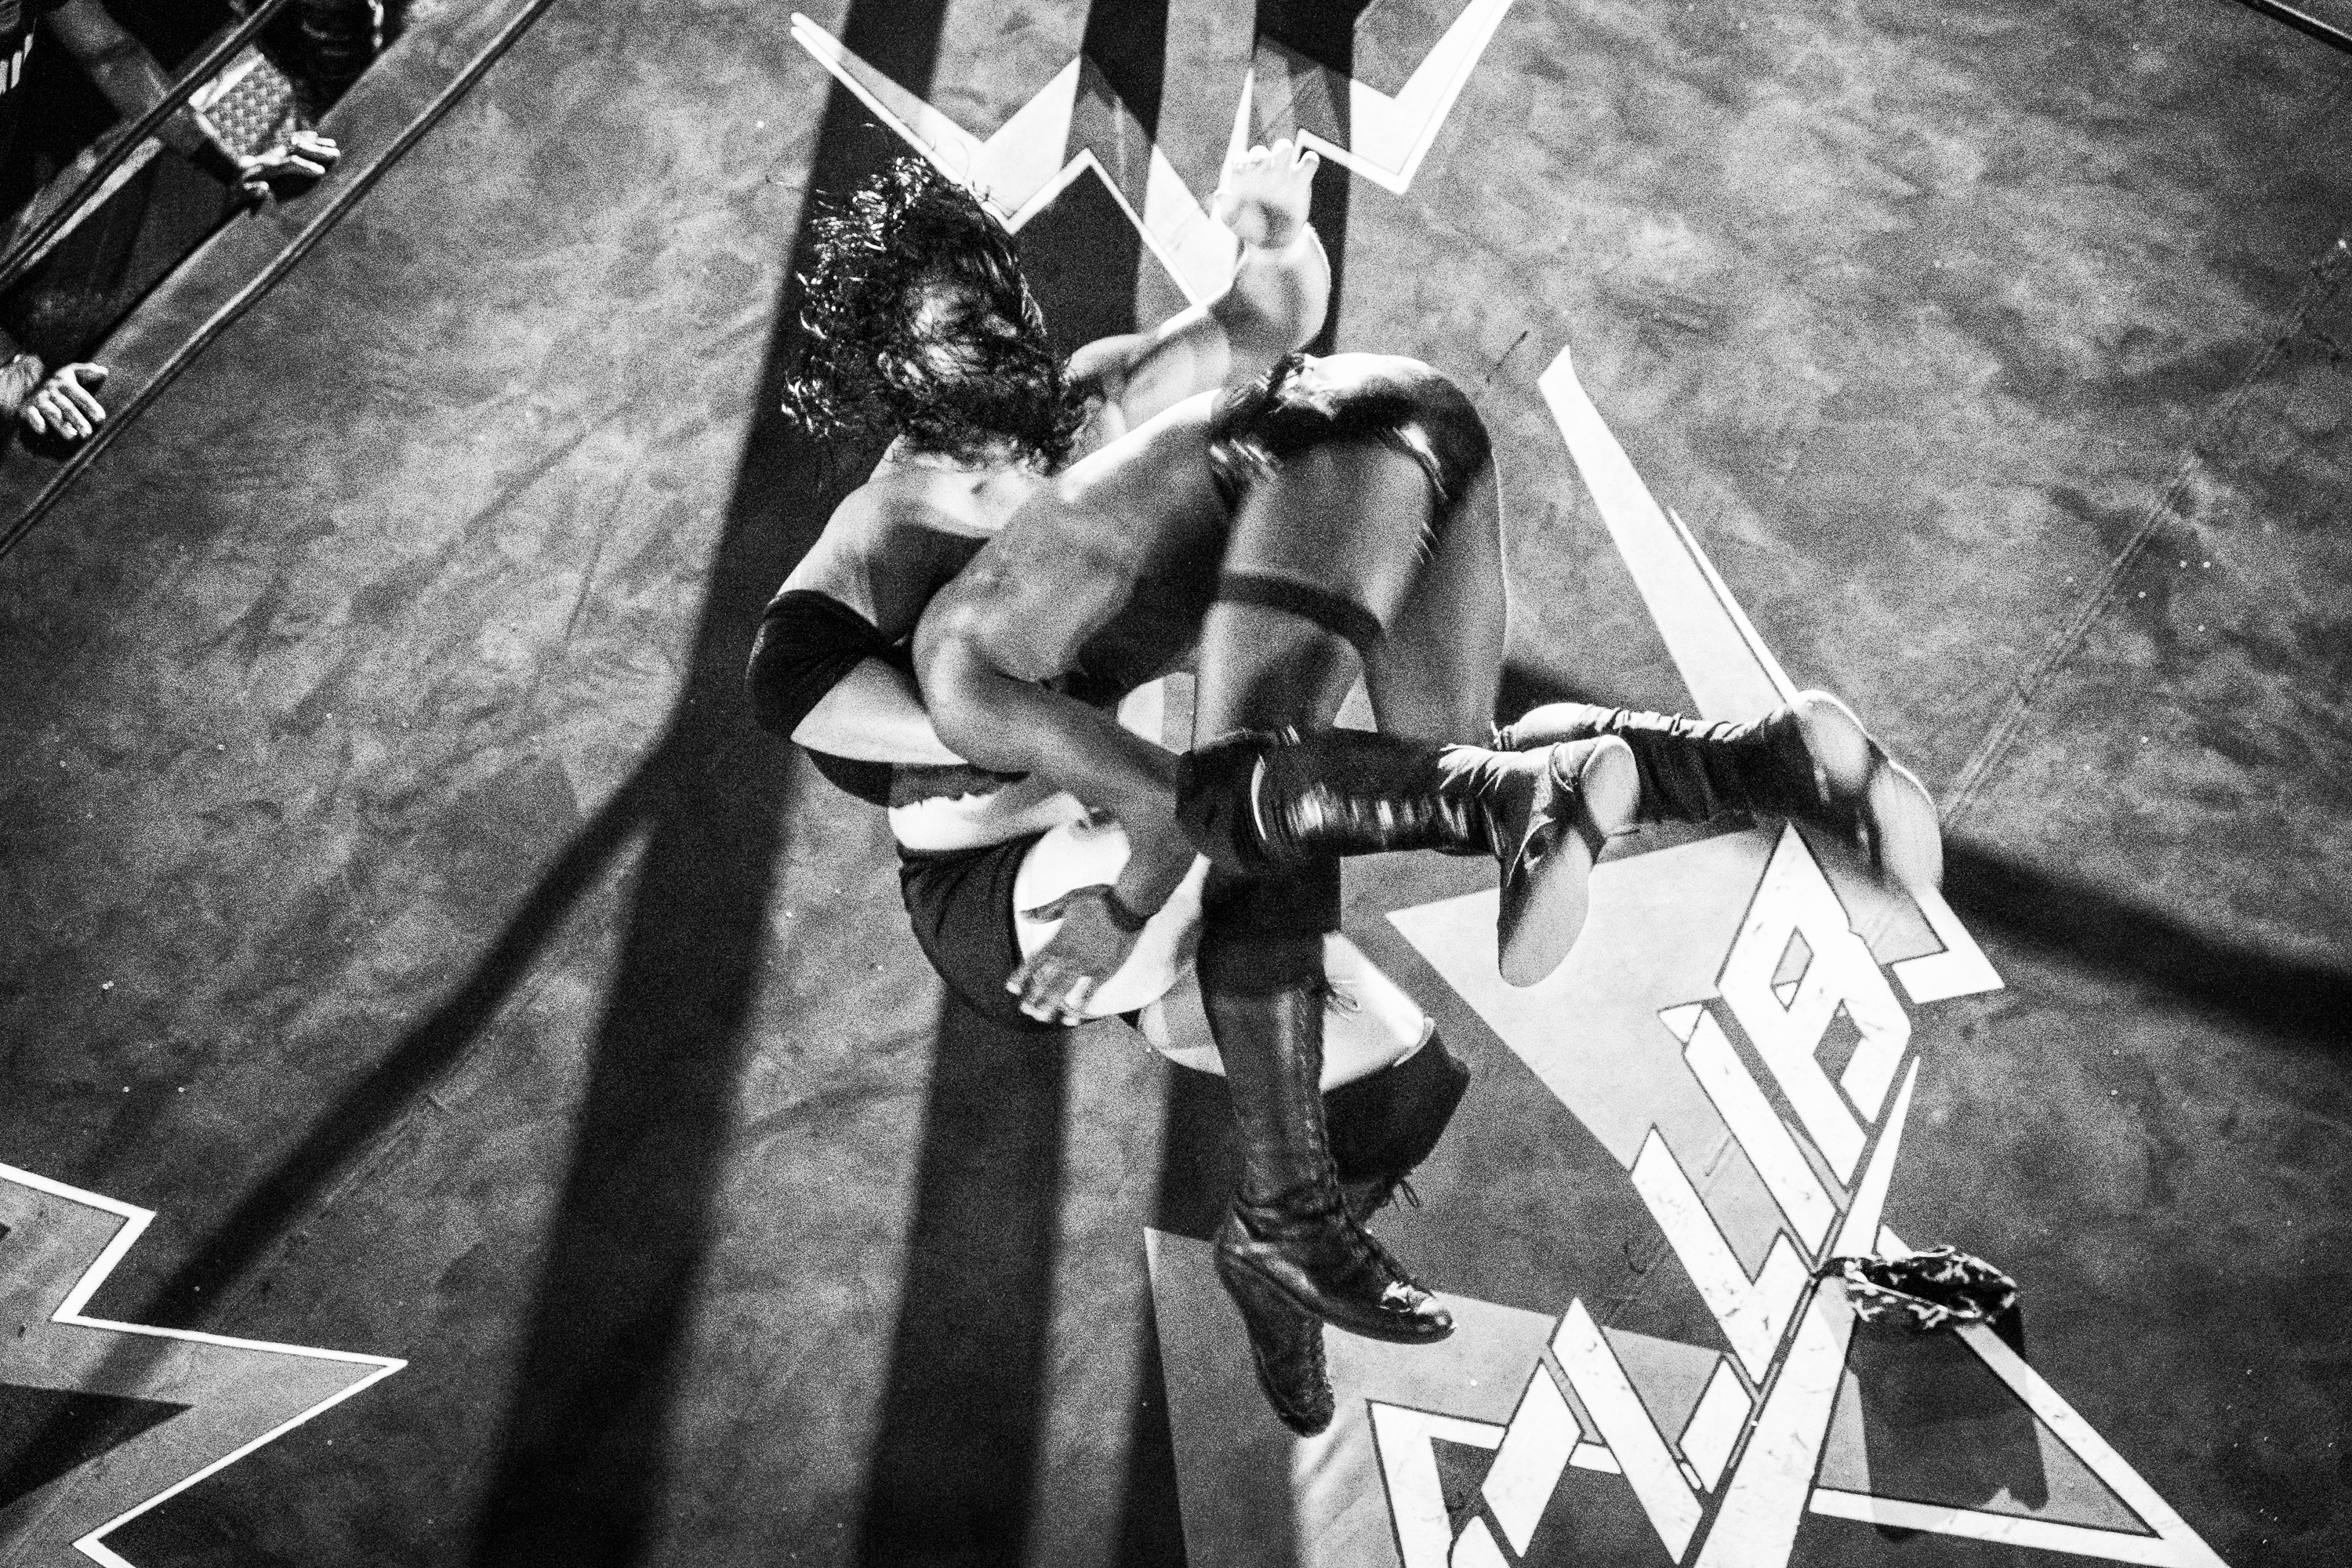 The Most Precious Blood Church 
2739 Harway Ave
Brooklyn, New York, United States
Aeriel shot of one of the wrestlers at the Evolve match